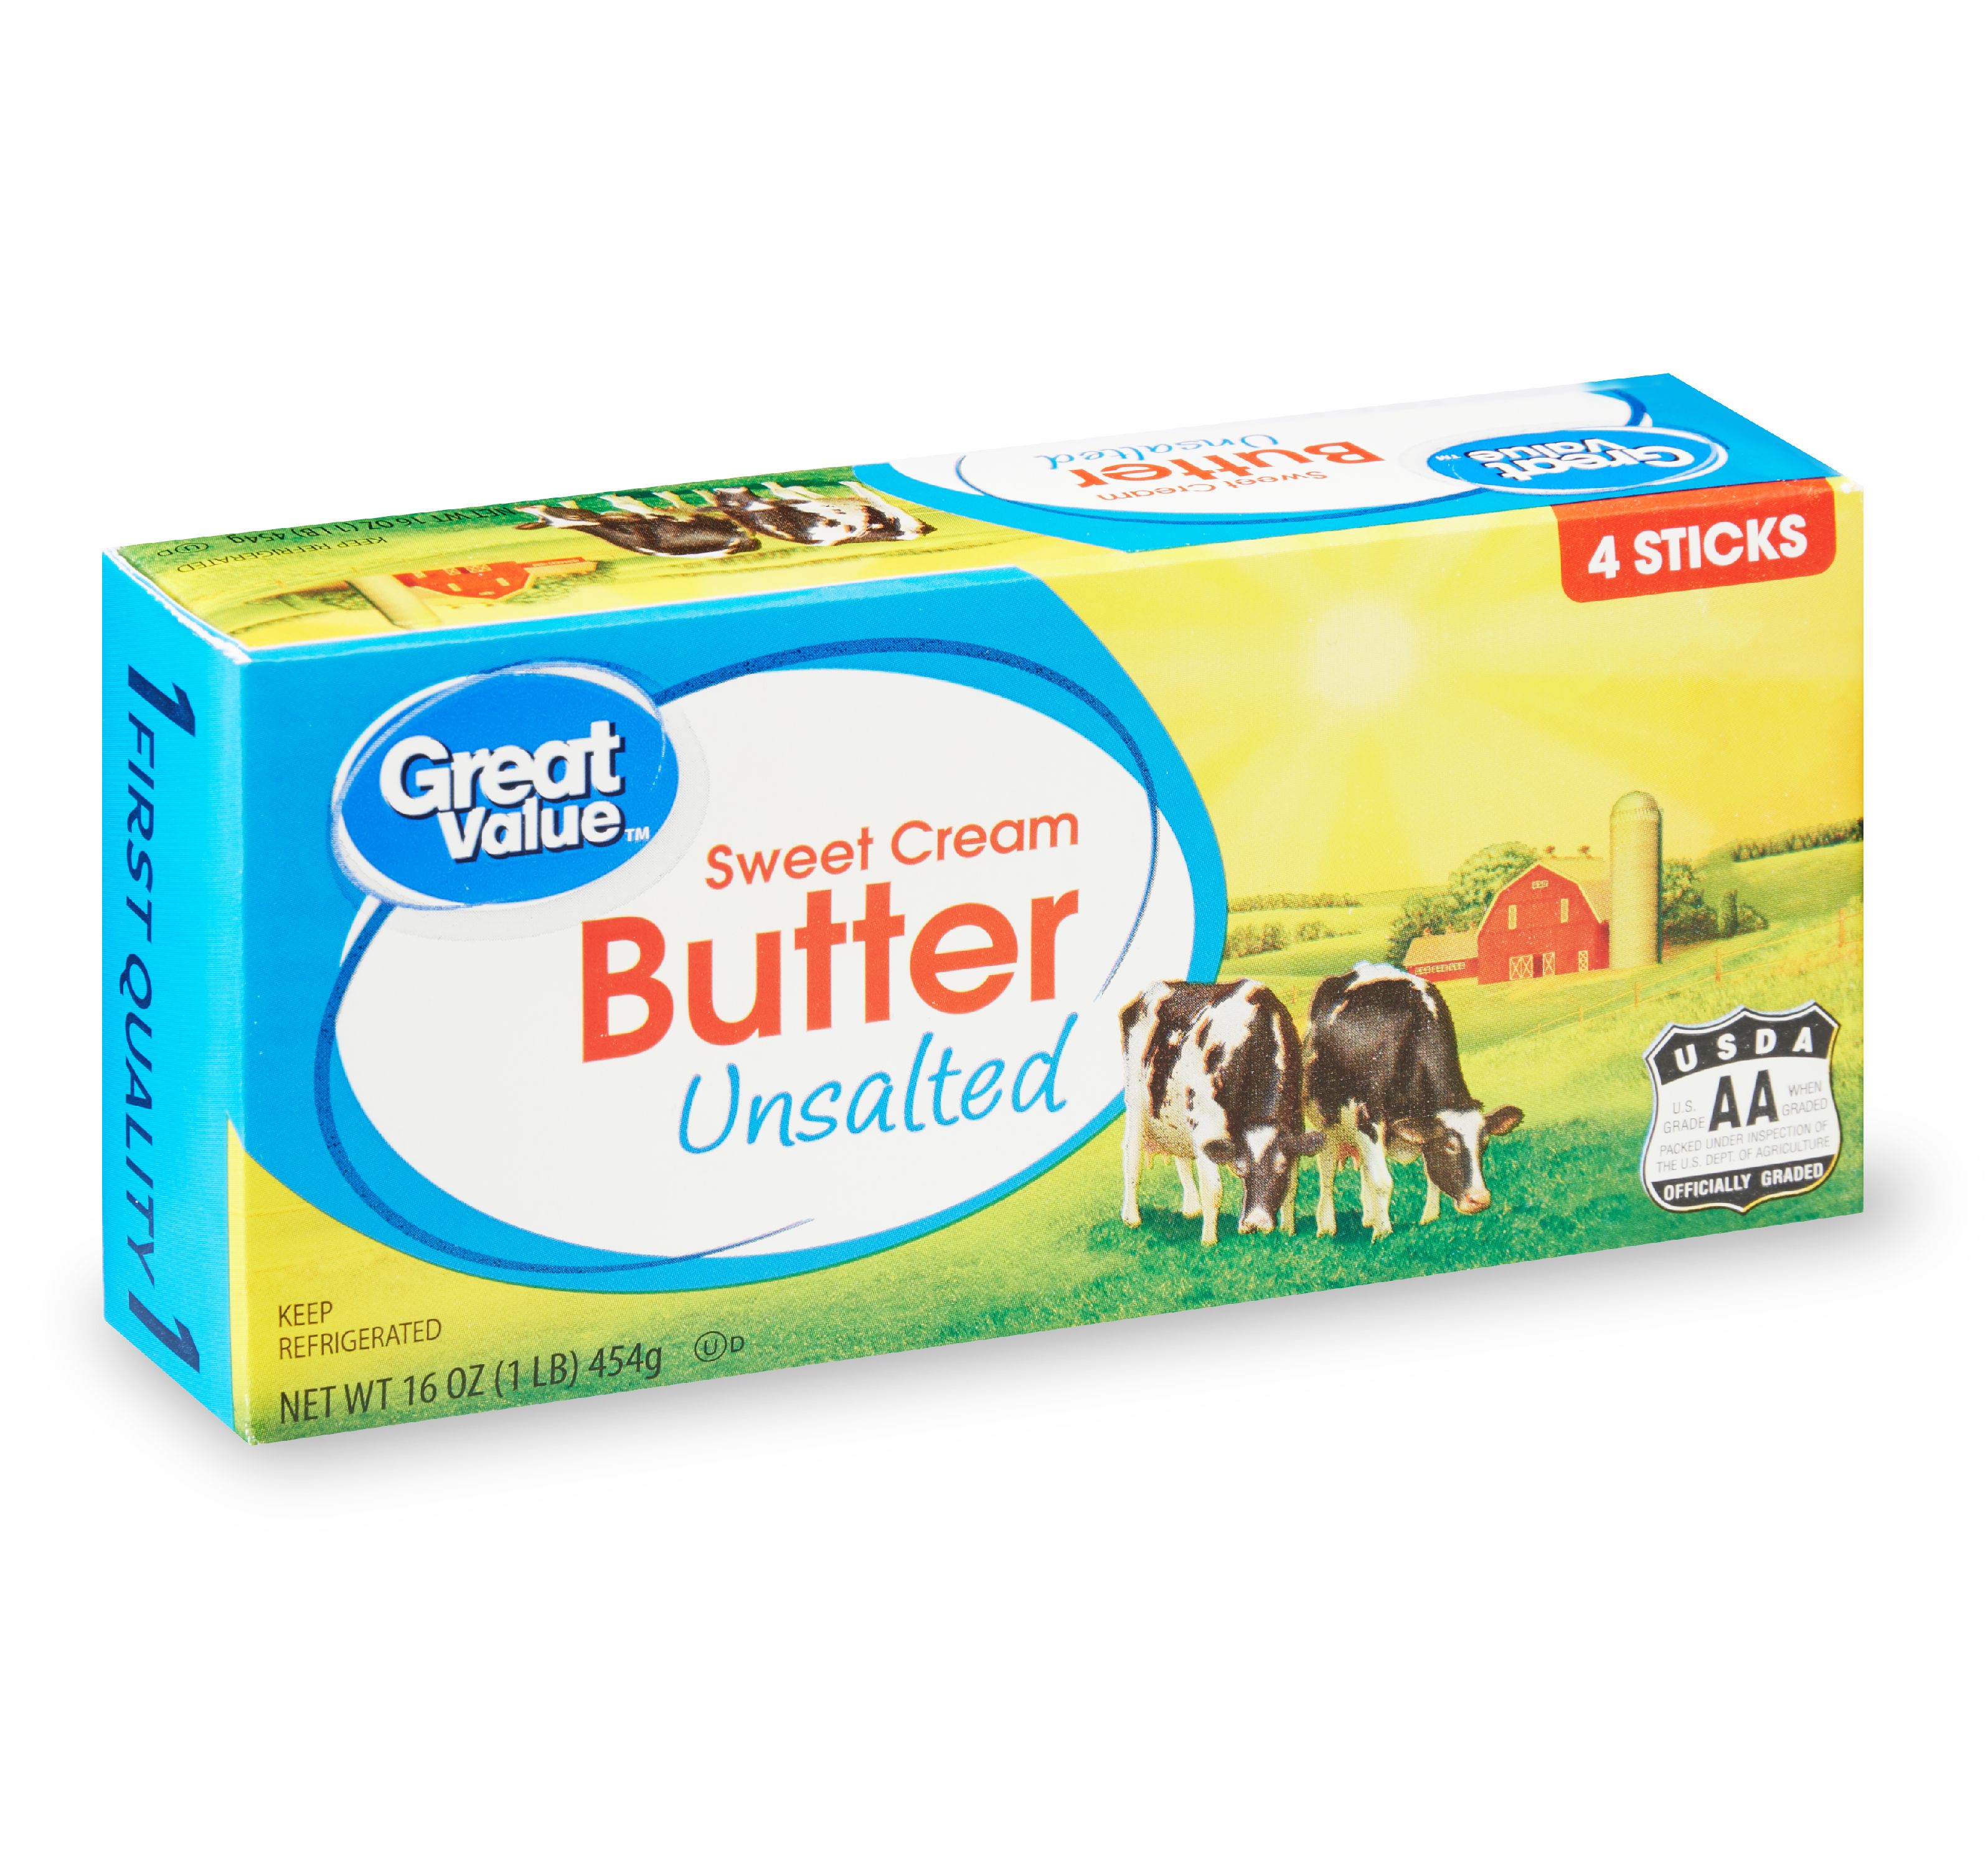 Great Value Sweet Cream Unsalted Butter Sticks, 16 Oz, 4 Count